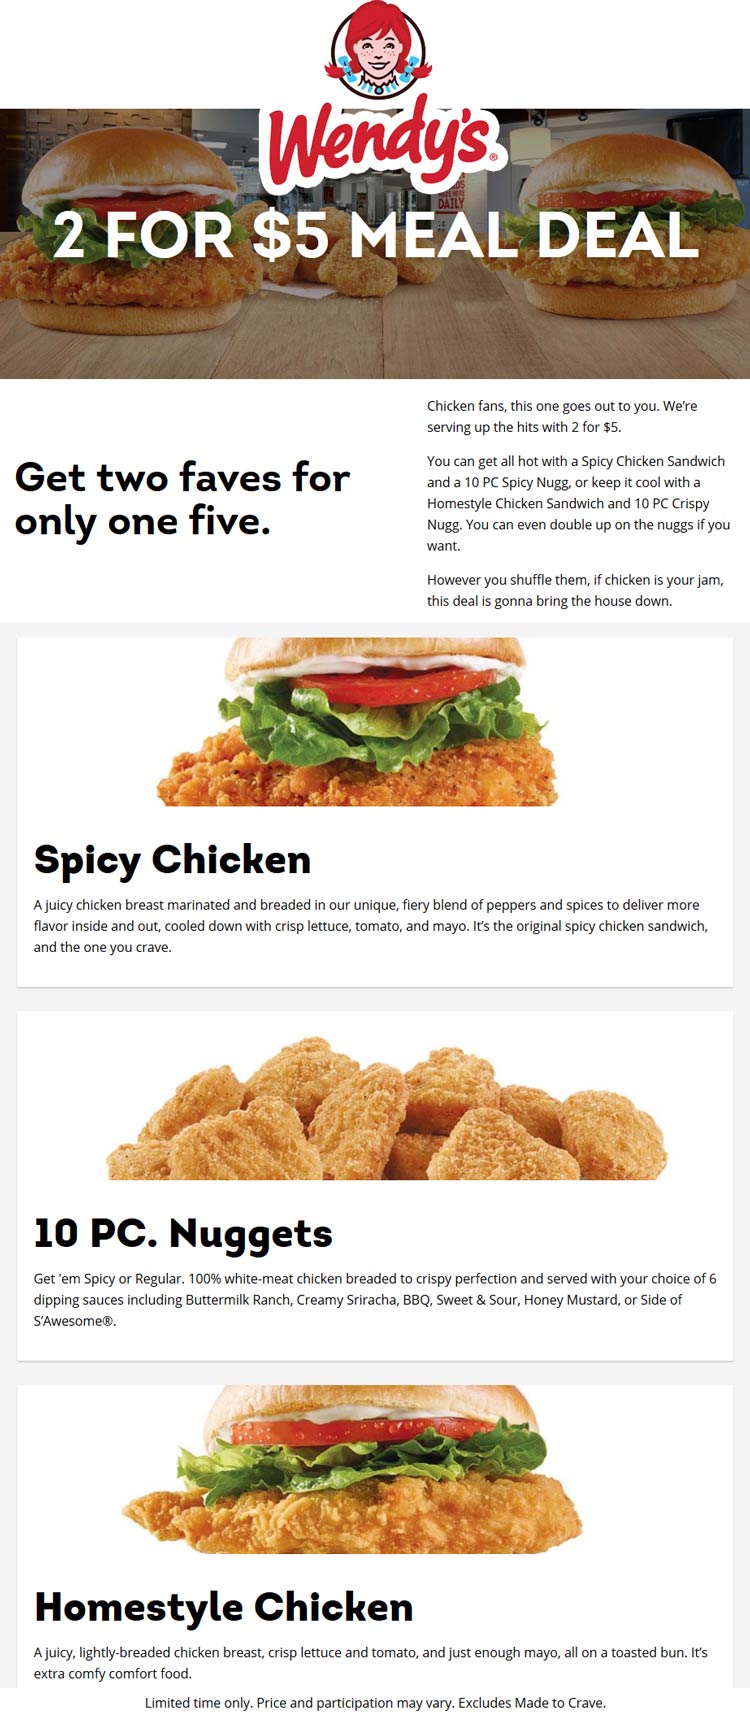 Wendys restaurants Coupon  2 chicken sandwiches or 10pc nuggets = $5 at Wendys #wendys